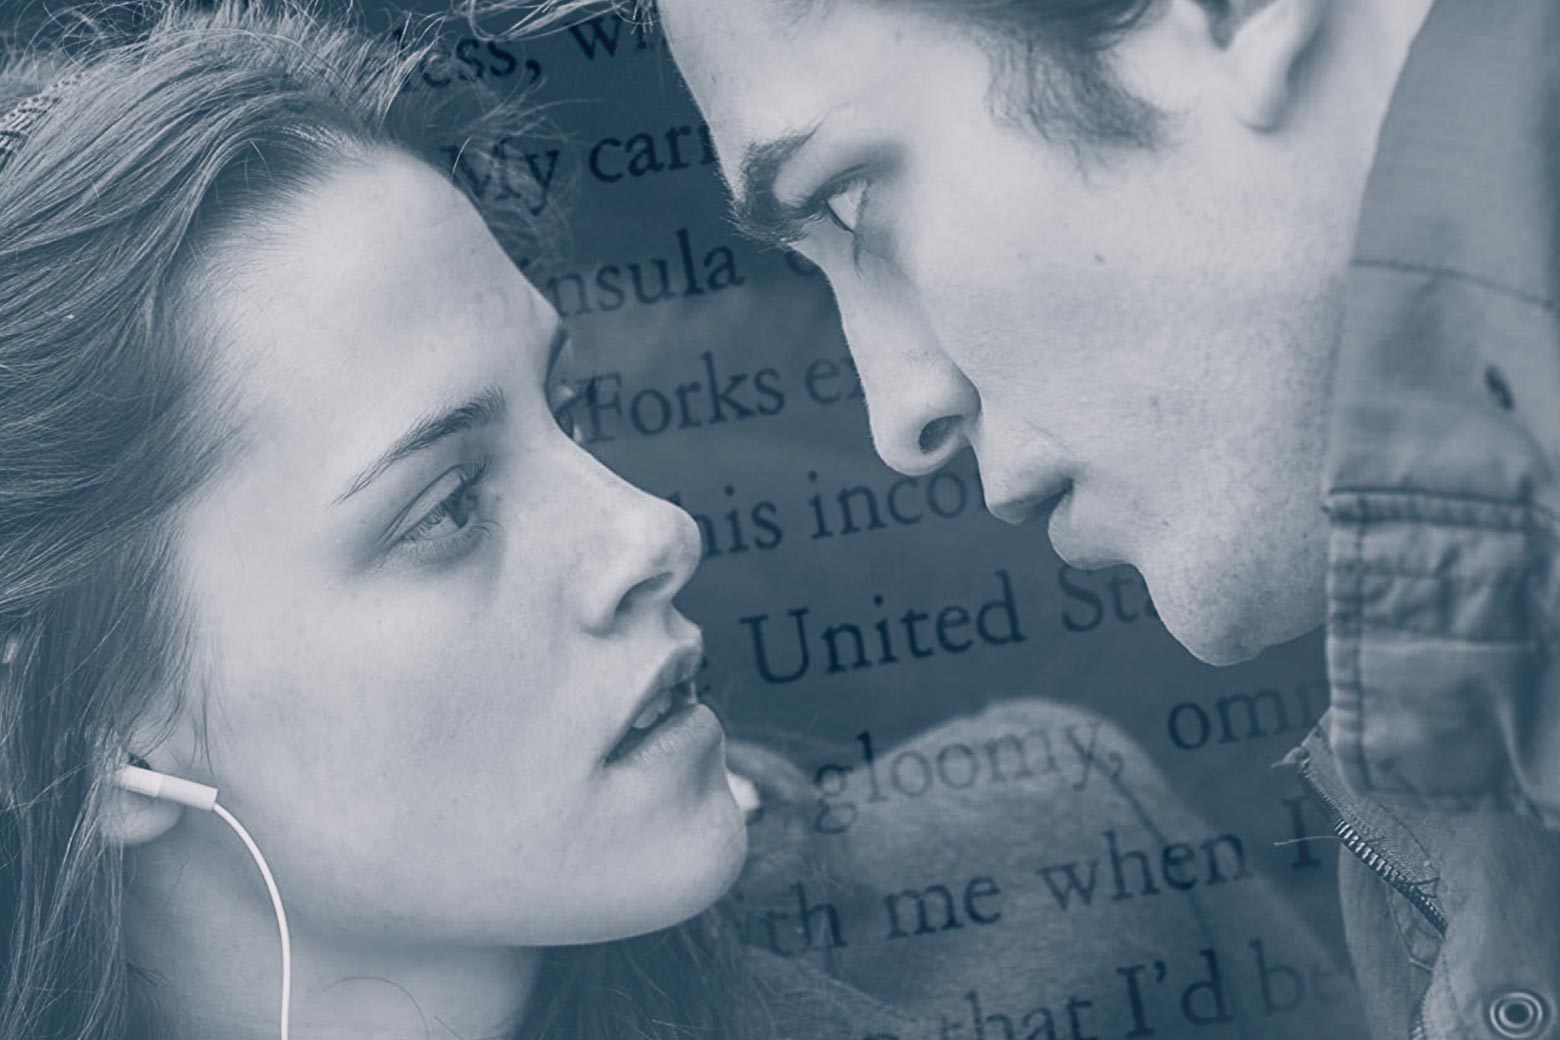 A movie still from Twilight featuring Robert Pattinson and Kristen Stewart overlaid over a picture of a book page. 